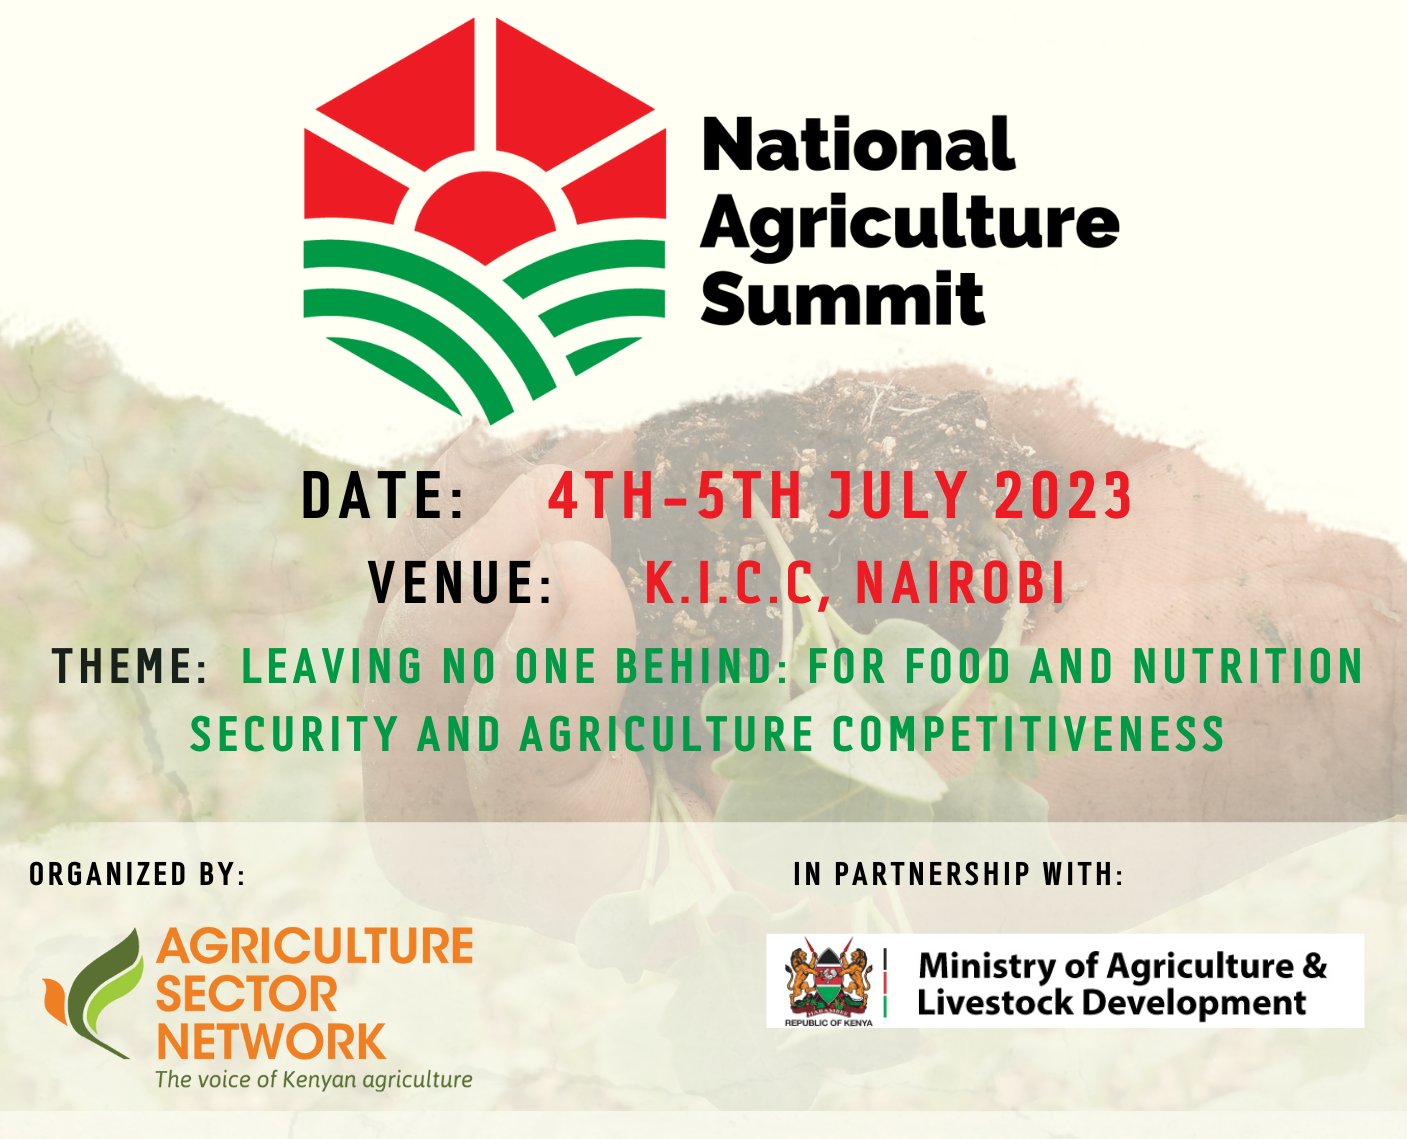 The 3rd National Agriculture Summit